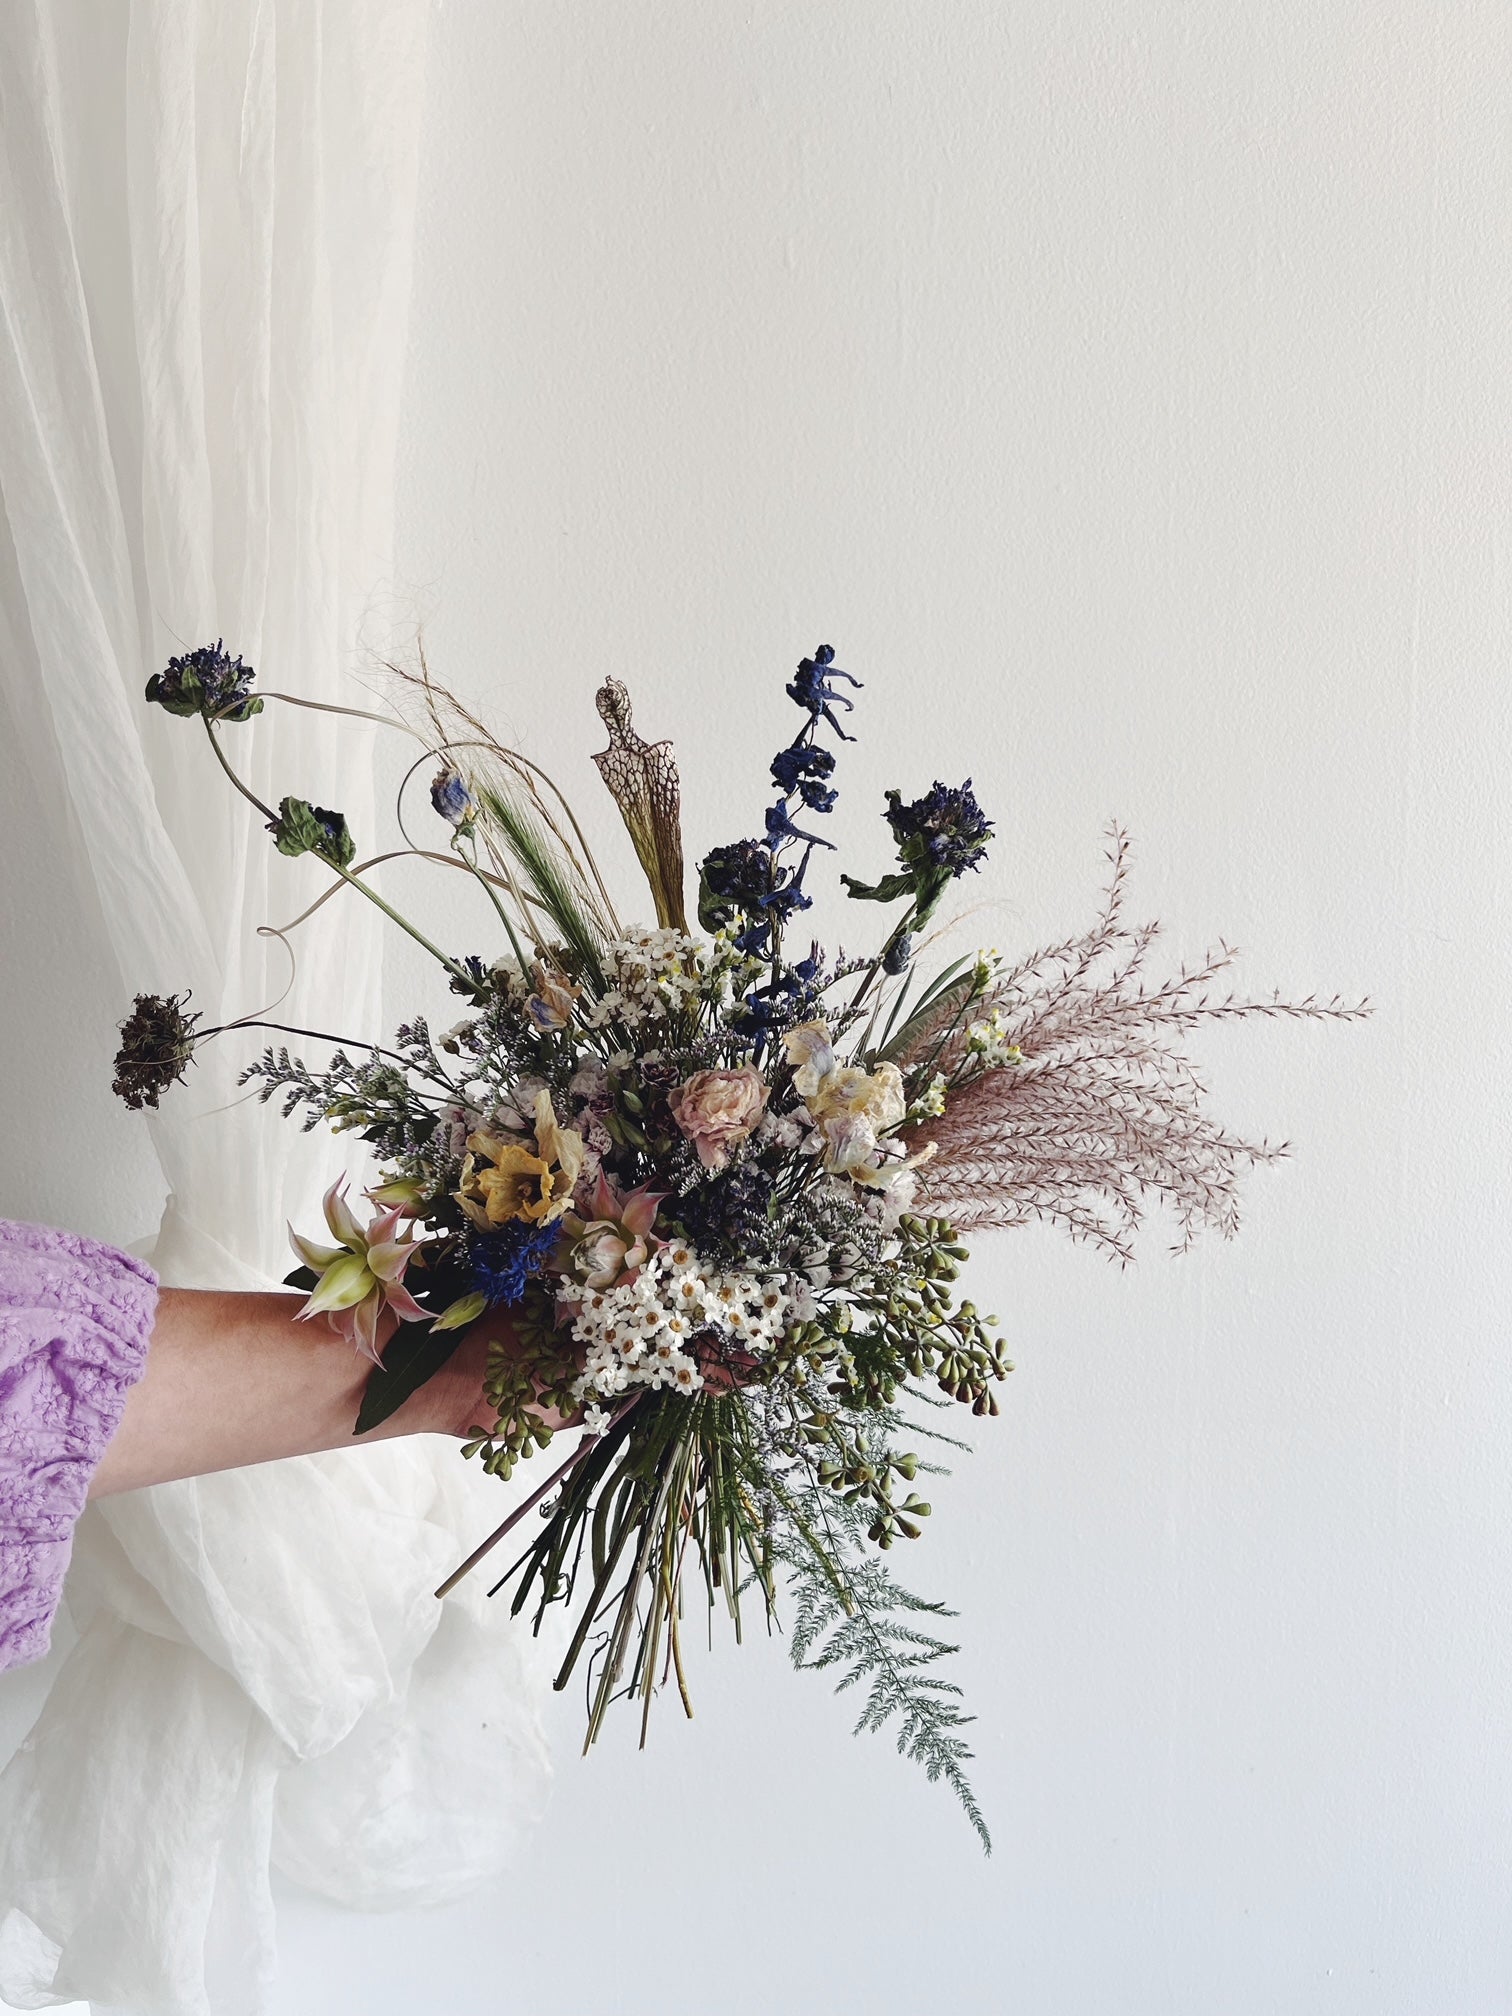 Flower Delivery Vancouver-The Dried Bridal Bouquet-Wedding Flowers-Florist-The Wild Bunch Flower Shop